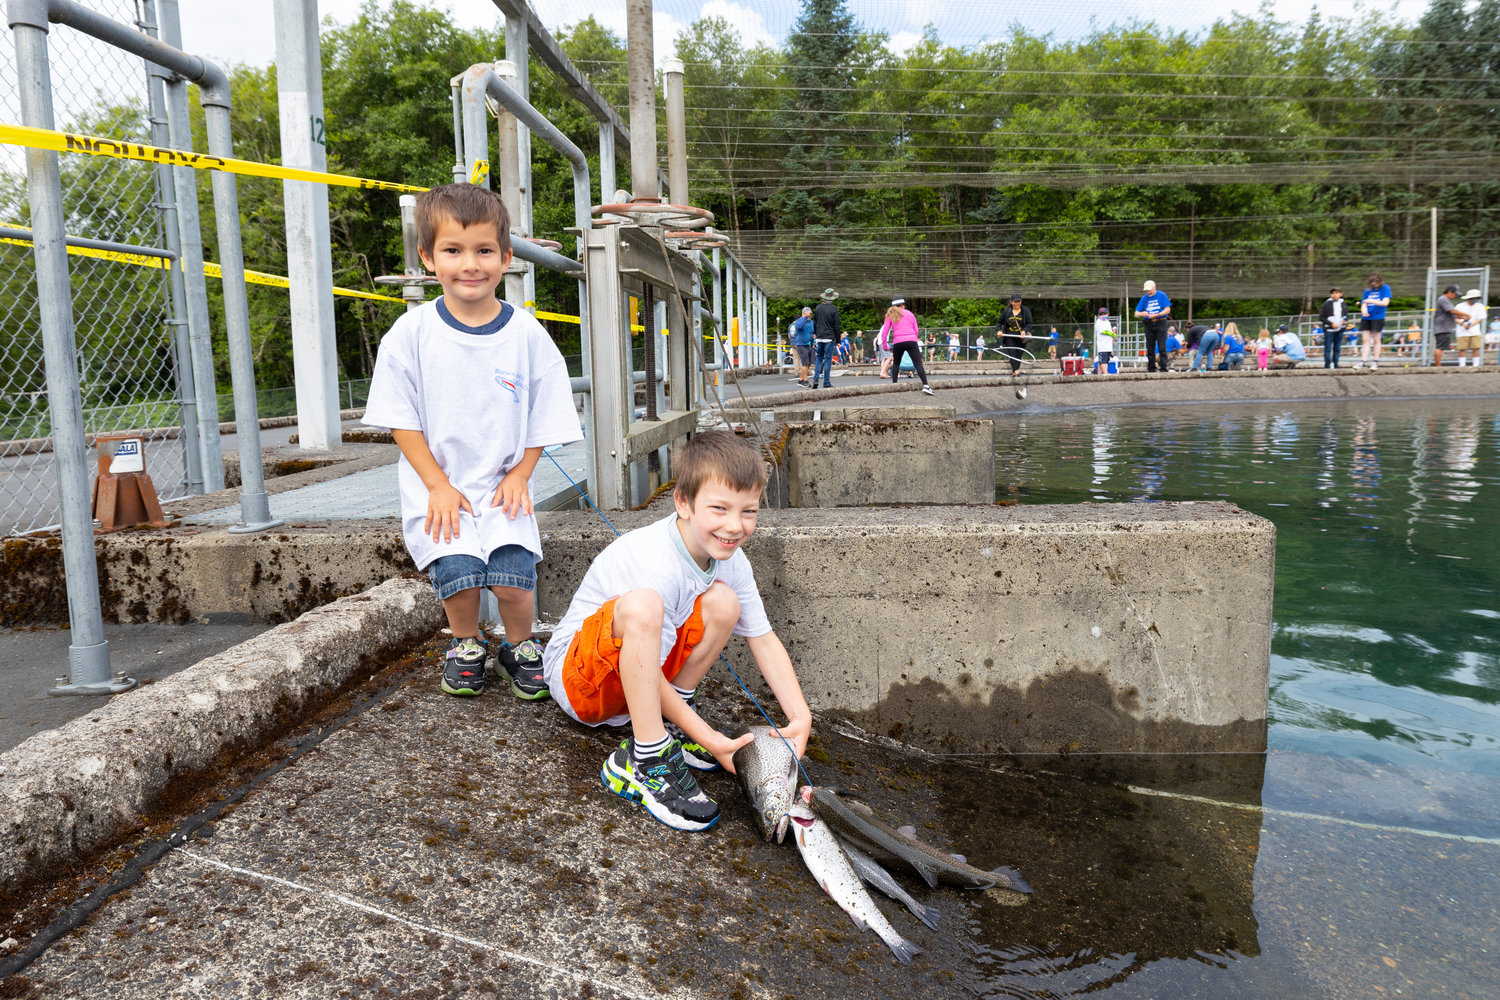 Kids show off rainbow trout that were caught at the Merwin Fish Hatchery in Woodland on July 9.